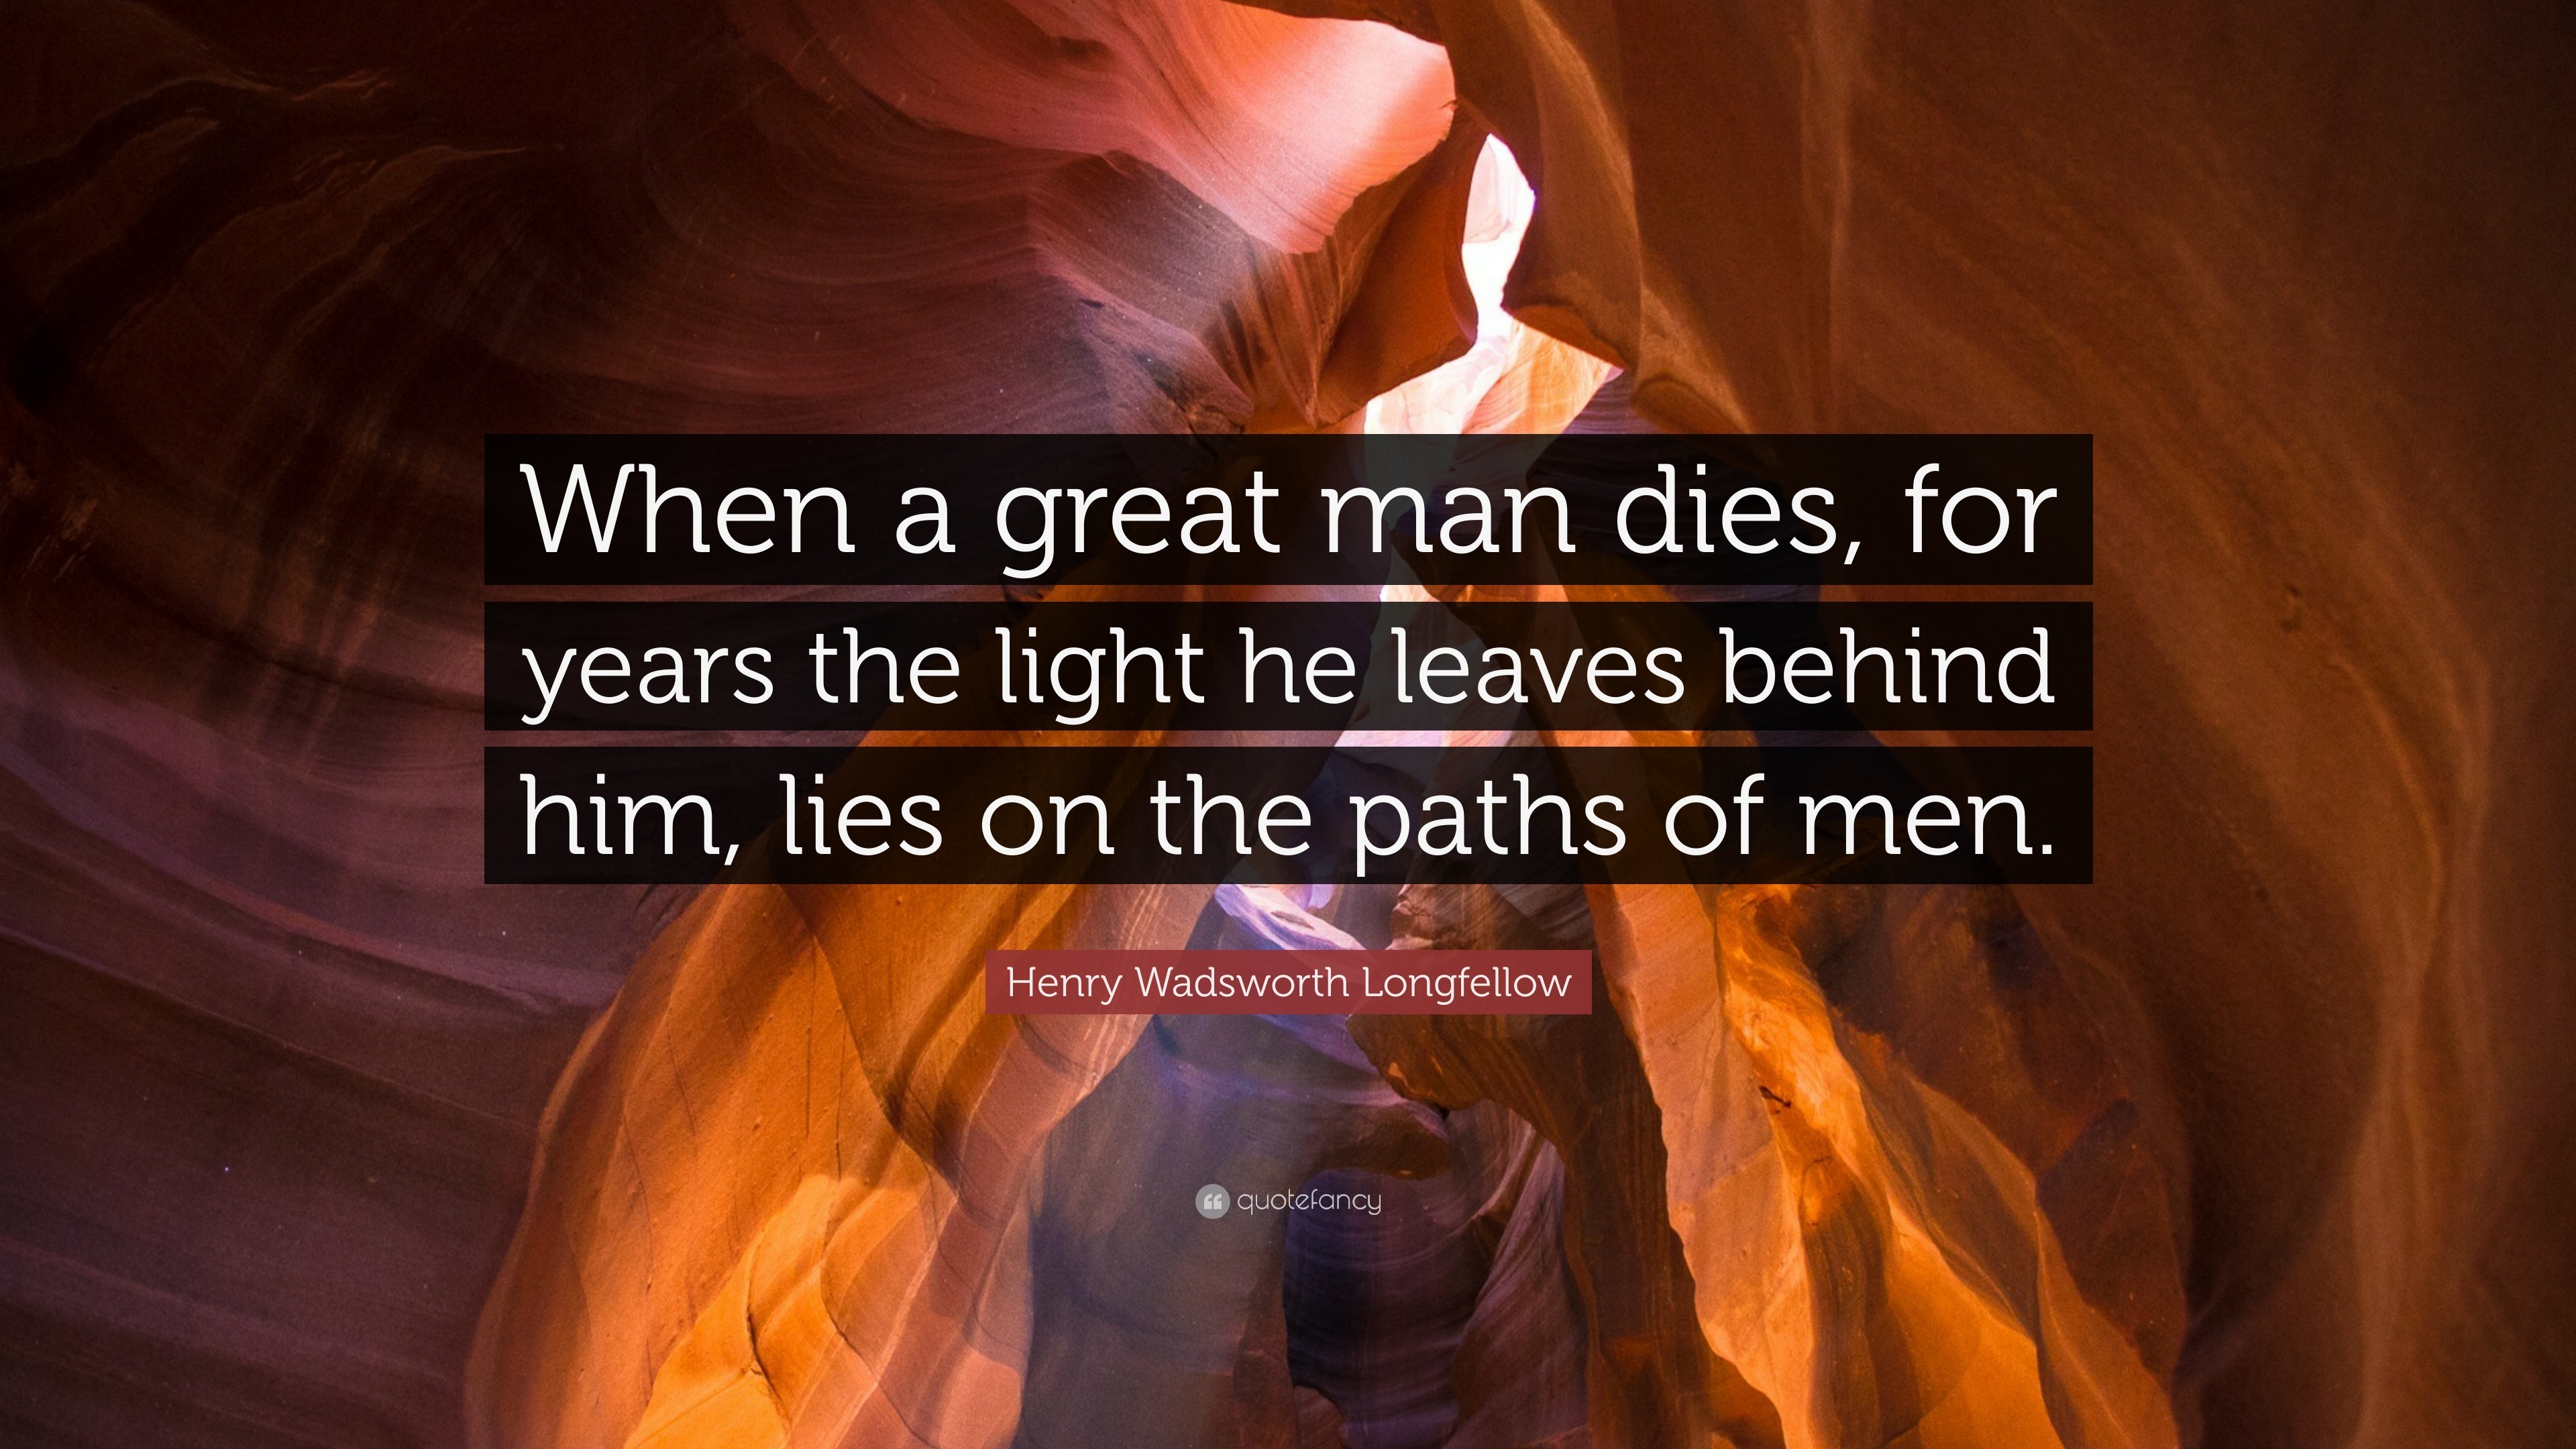 Henry Wadsworth Longfellow Quote When A Great Man Dies For Years The Light He Leaves Behind